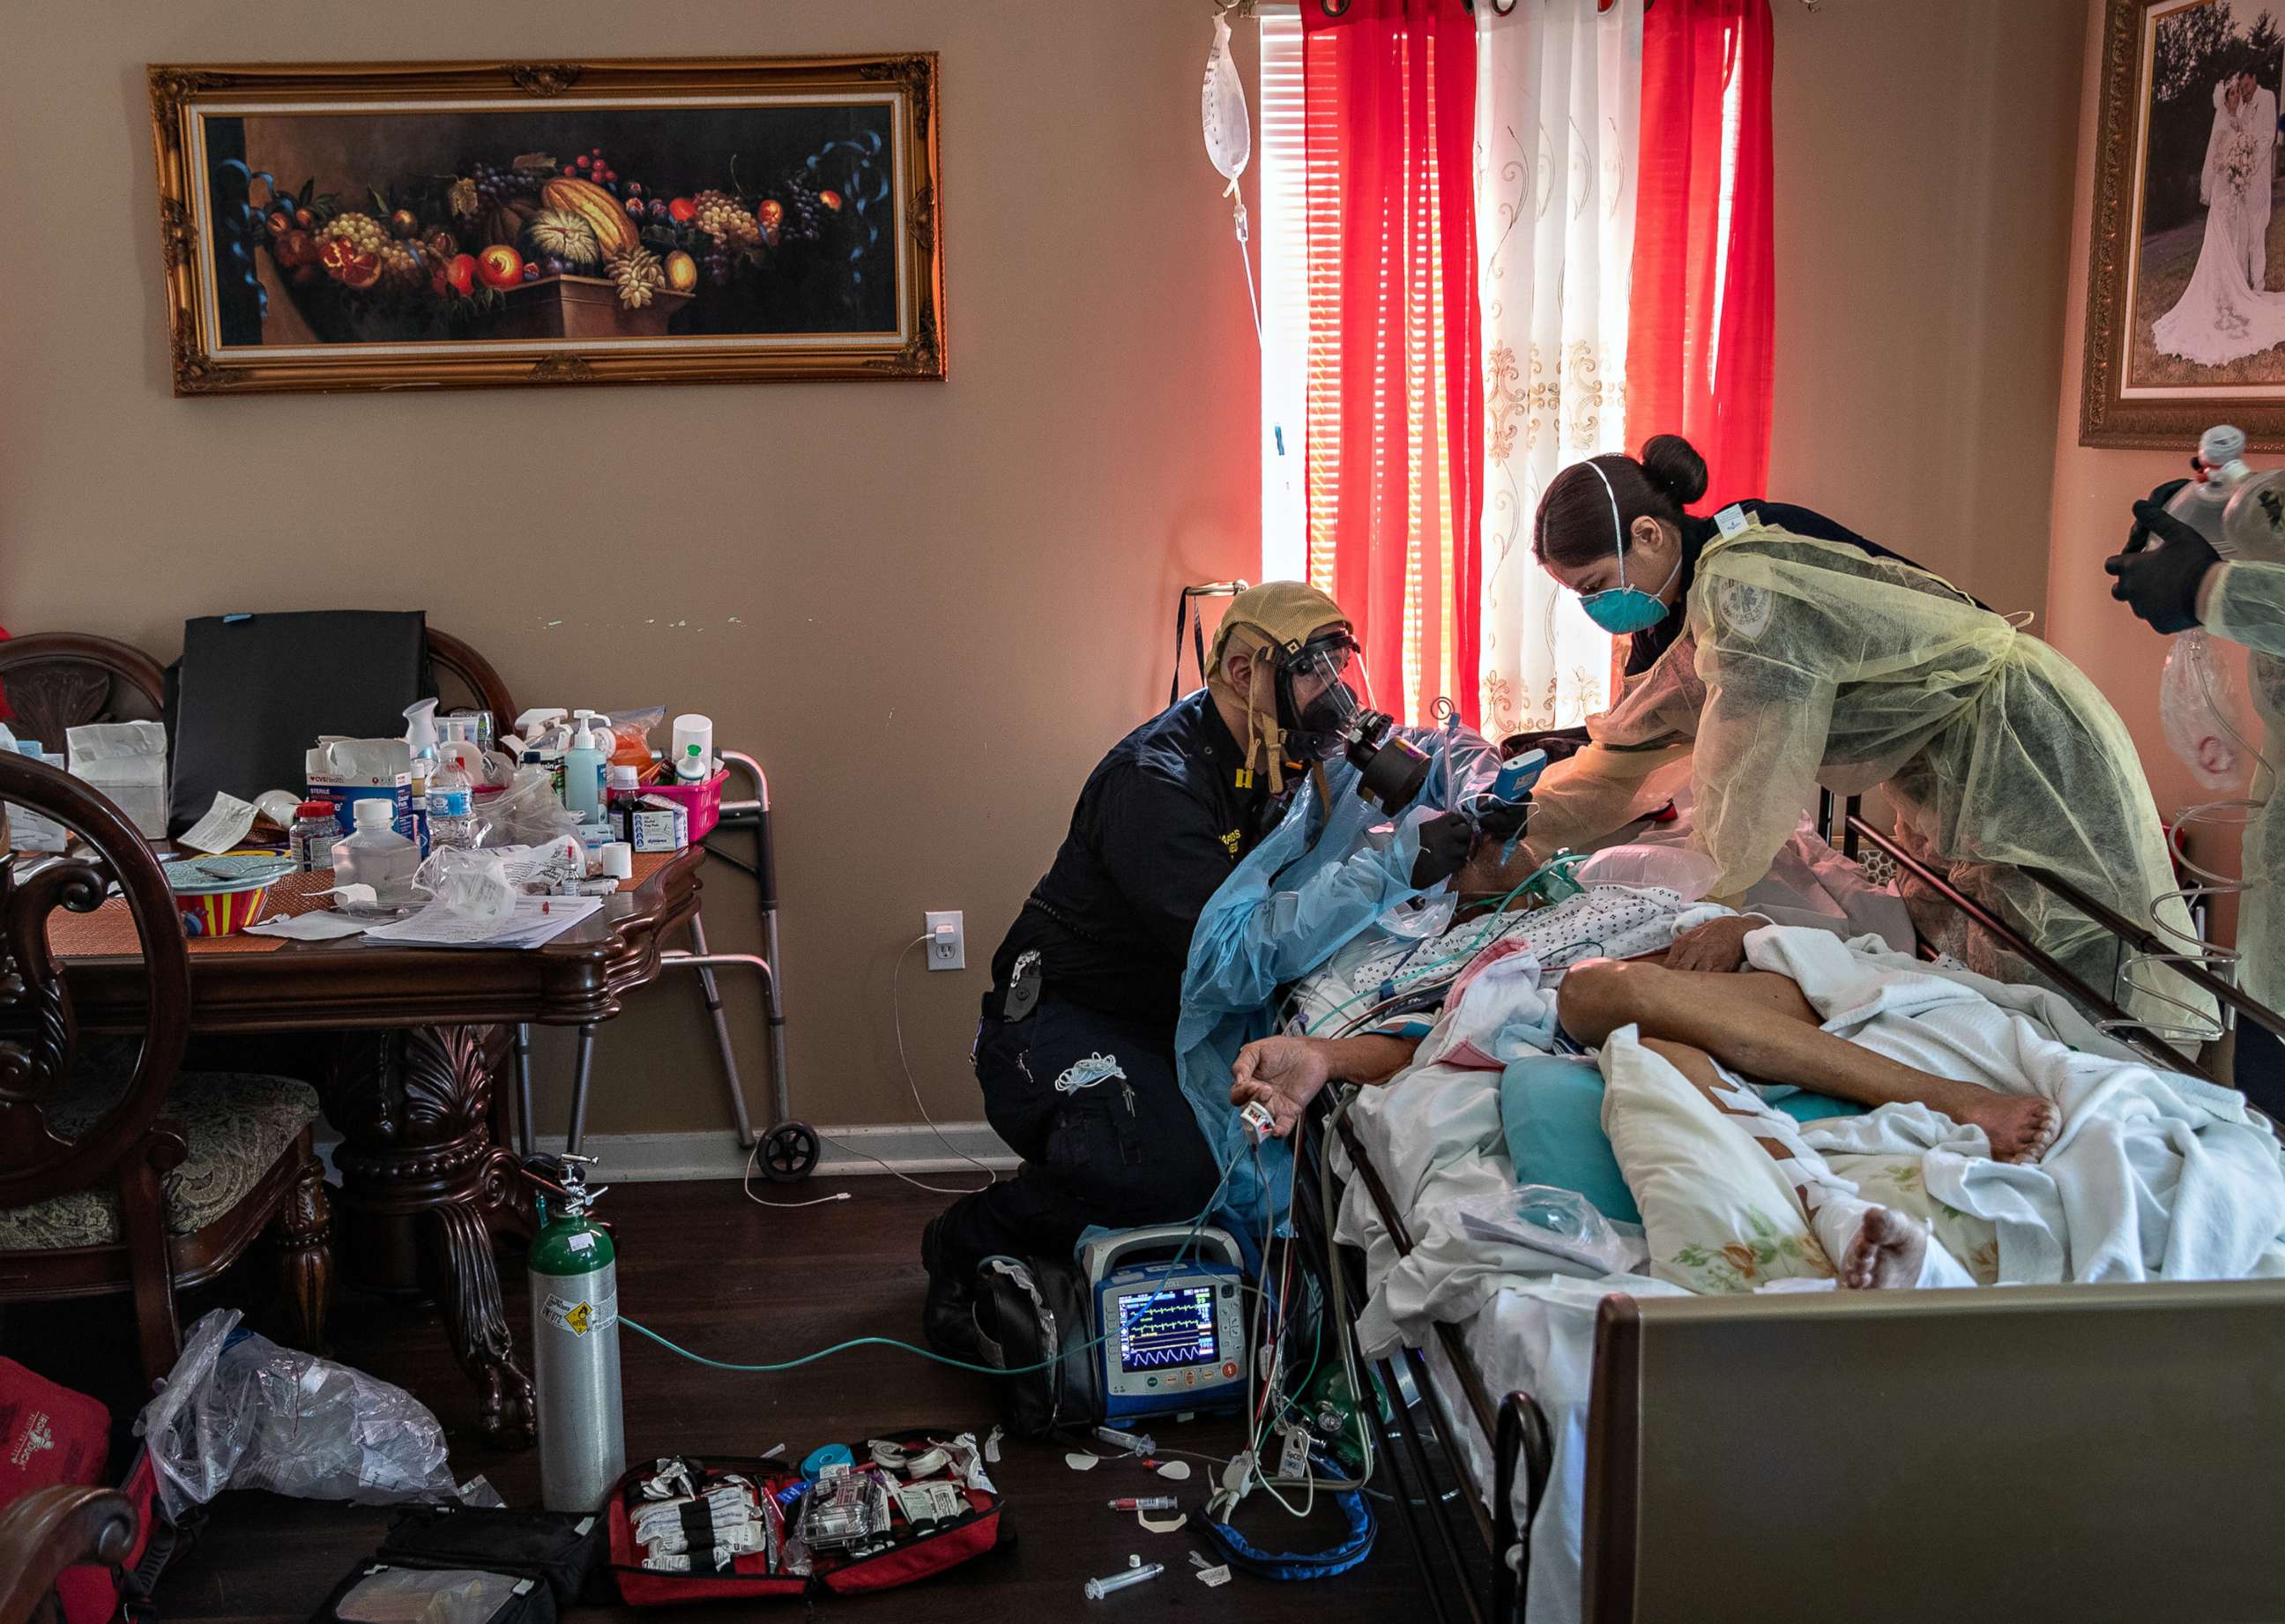 PHOTO: Capt. AJ Briones (paramedic), center, and Michelle Melo (EMT) intubate a gravely ill patient with COVID-19 symptoms at his home, on April 6, 2020, in Yonkers, New York. 